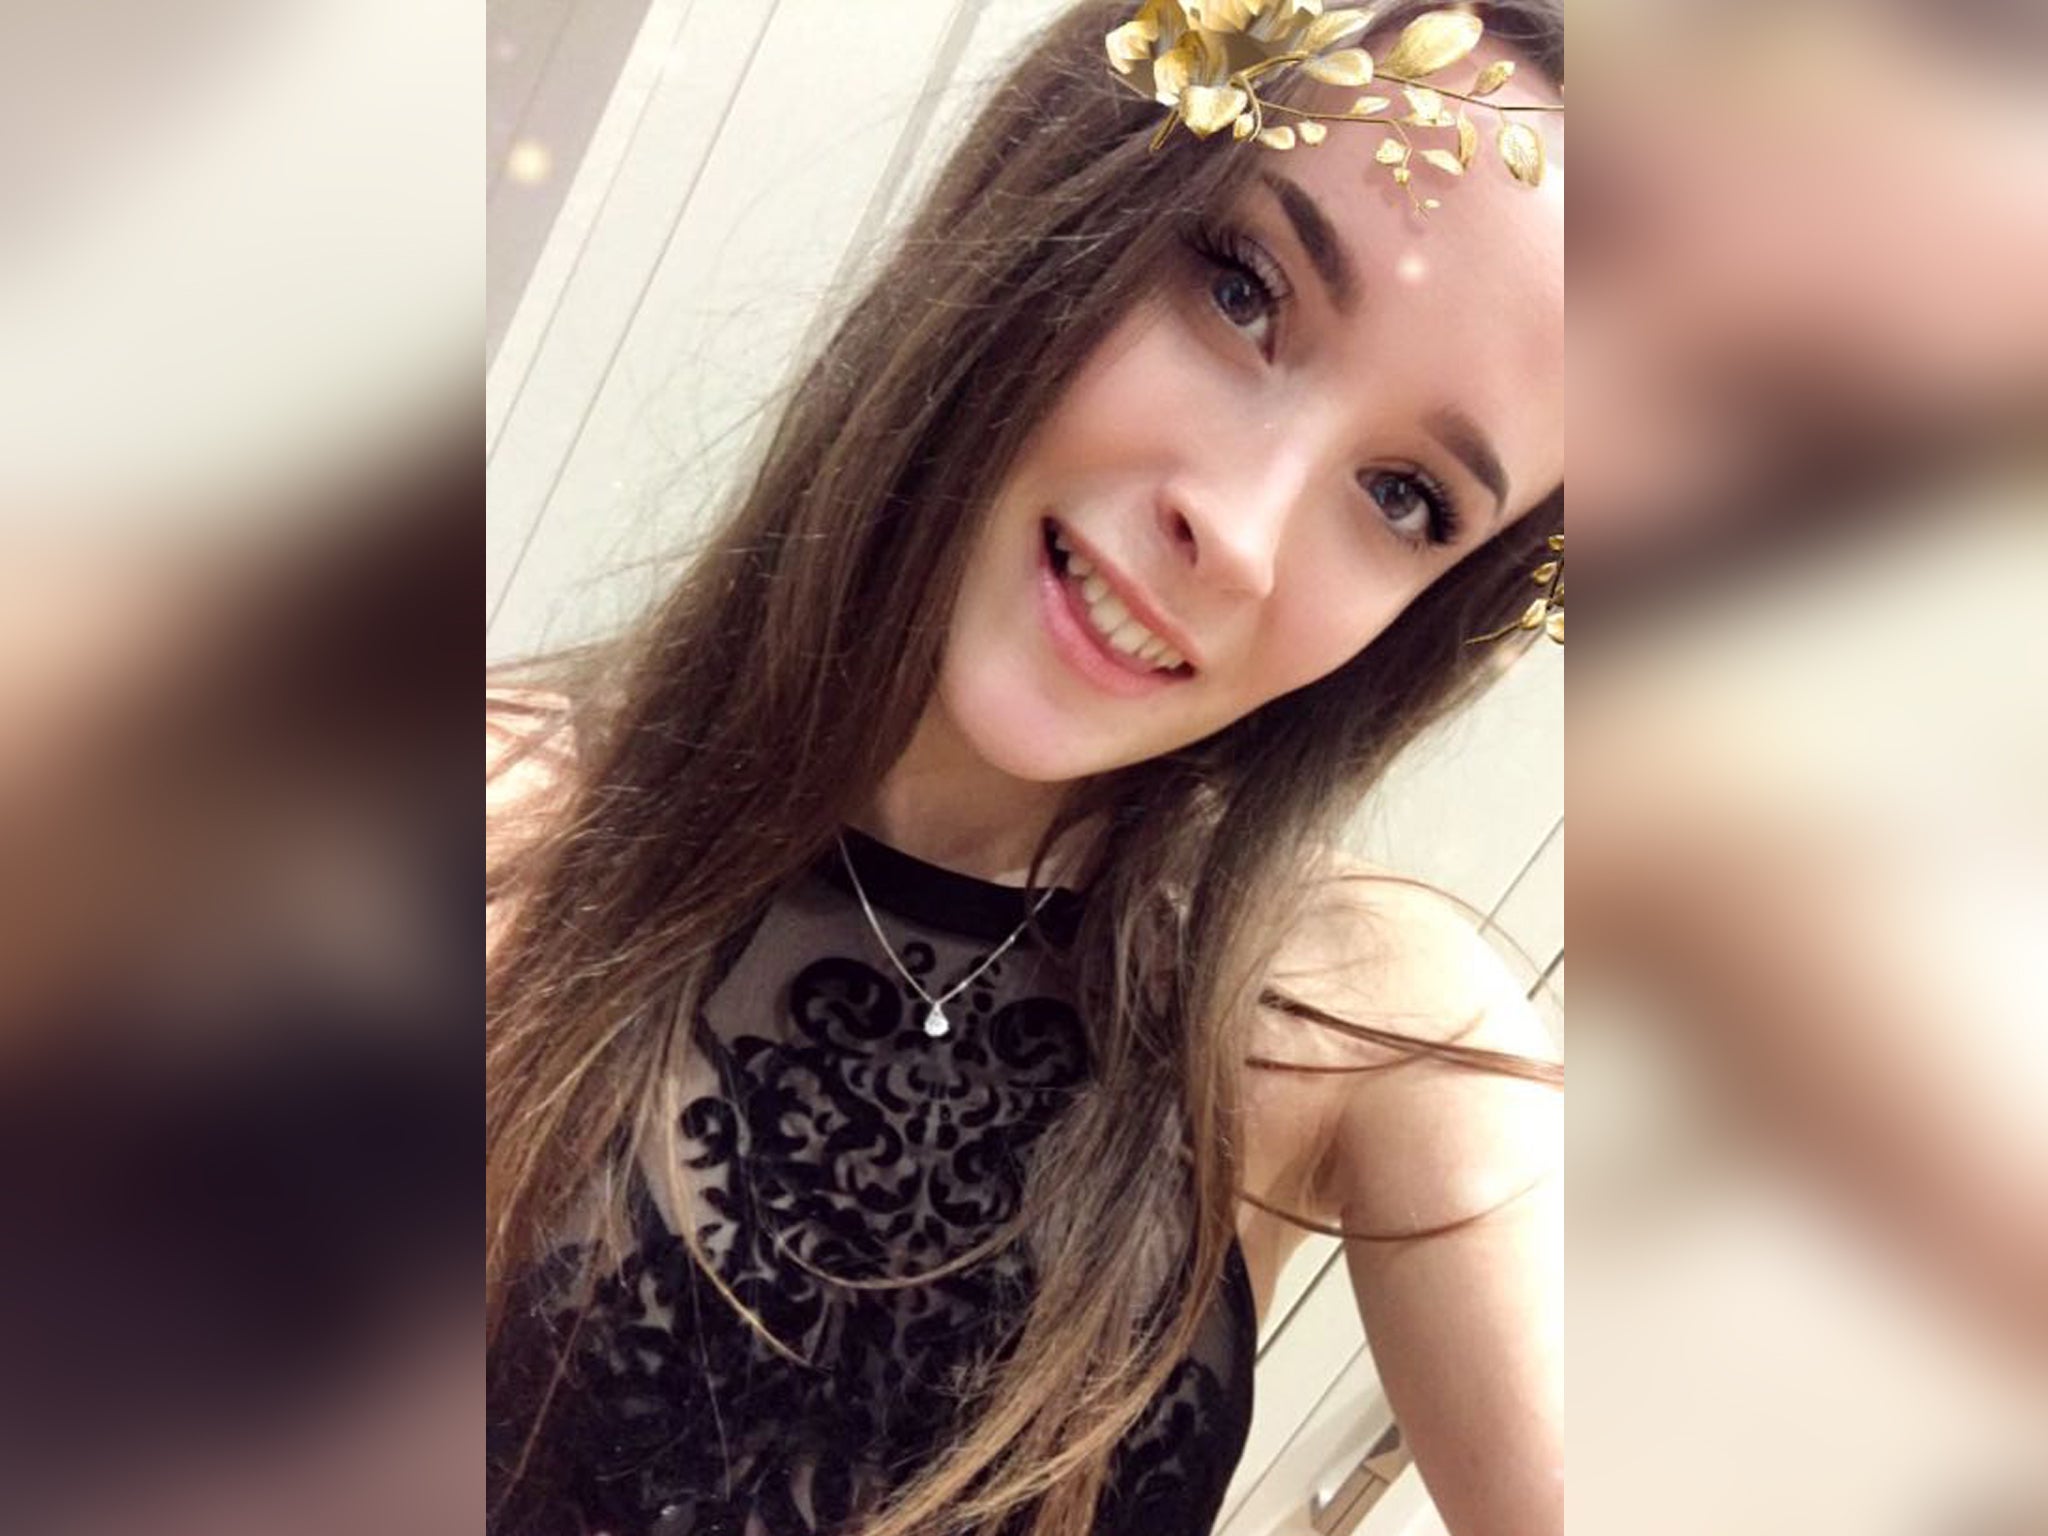 Tributes on social media have described her as a 'beautiful' and 'lovely' young woman